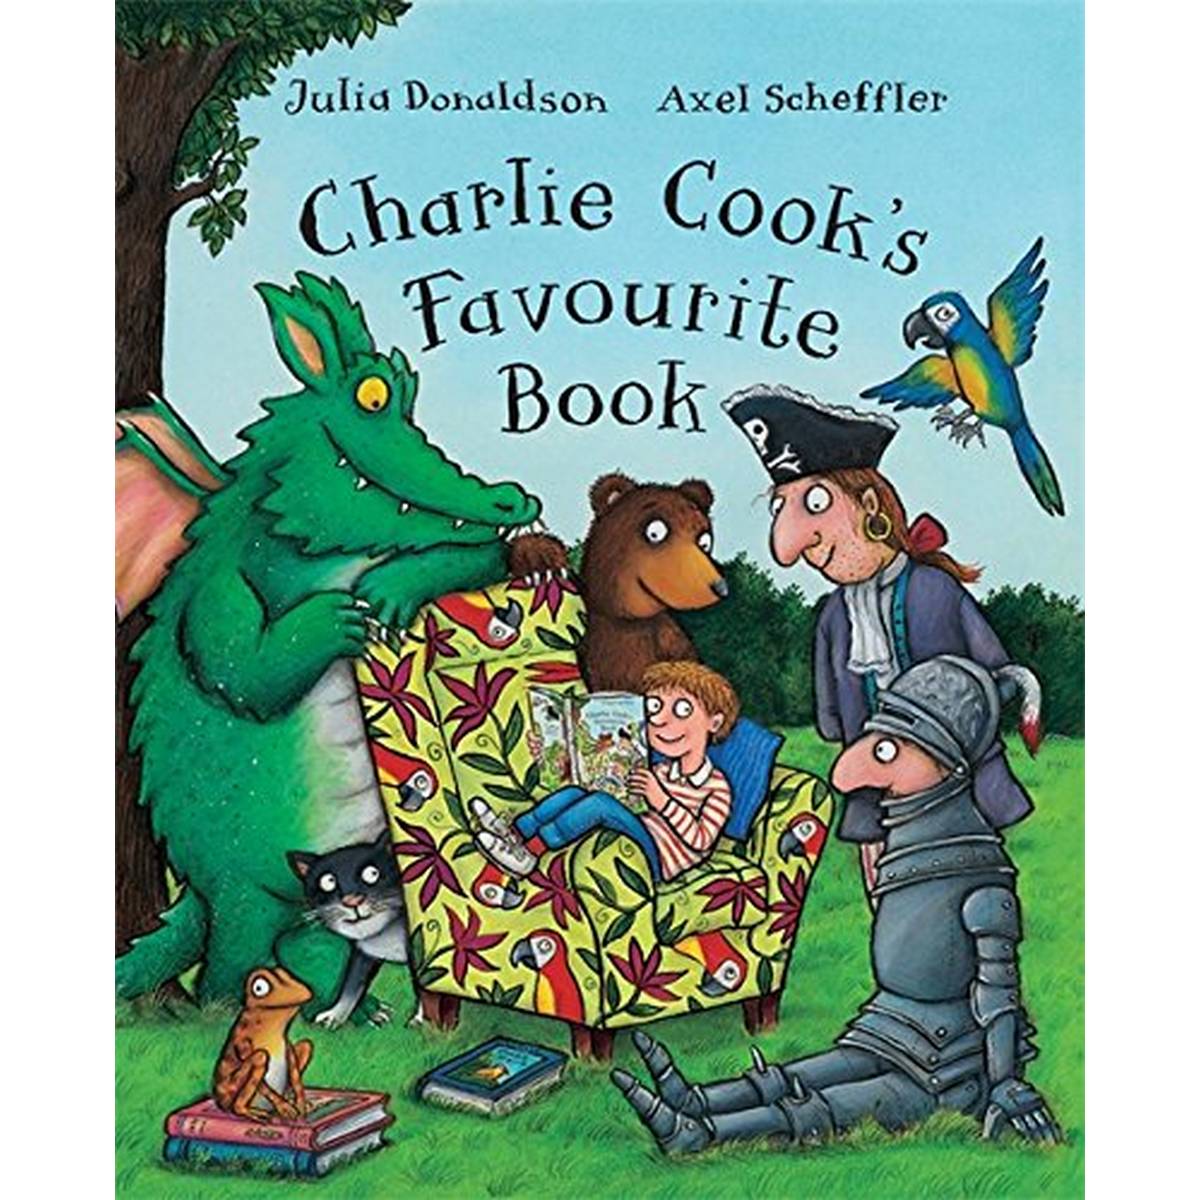 Charlie Cook's Favourite Book (Big Books)